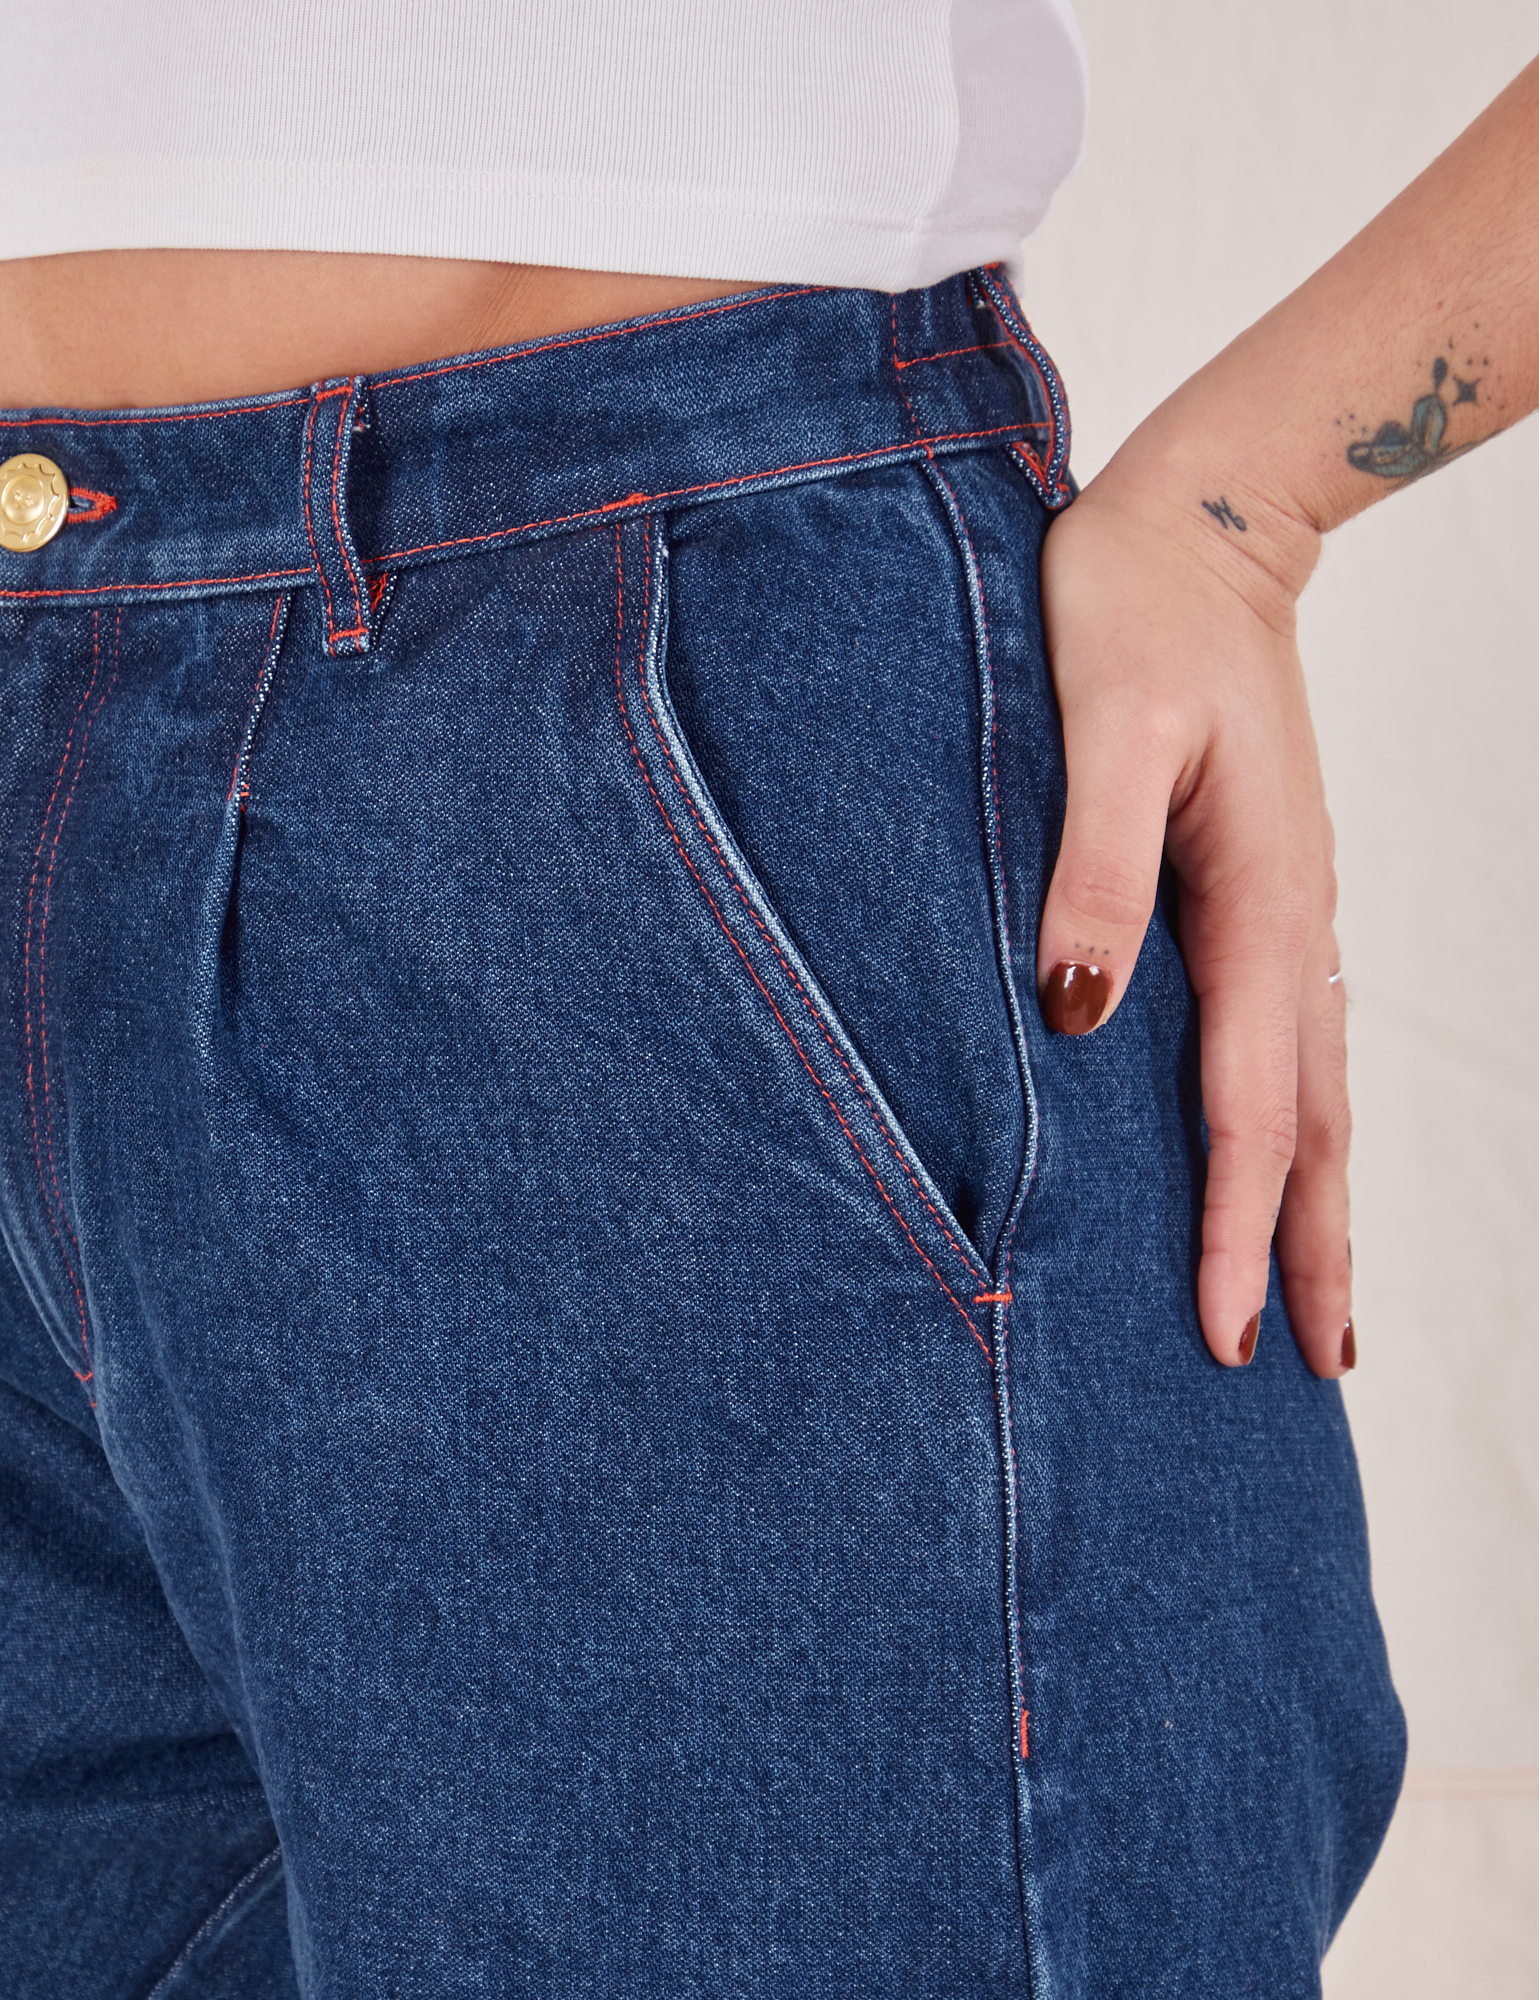 Indigo Wide Leg Trousers in Dark Wash front pocket close up on Betty